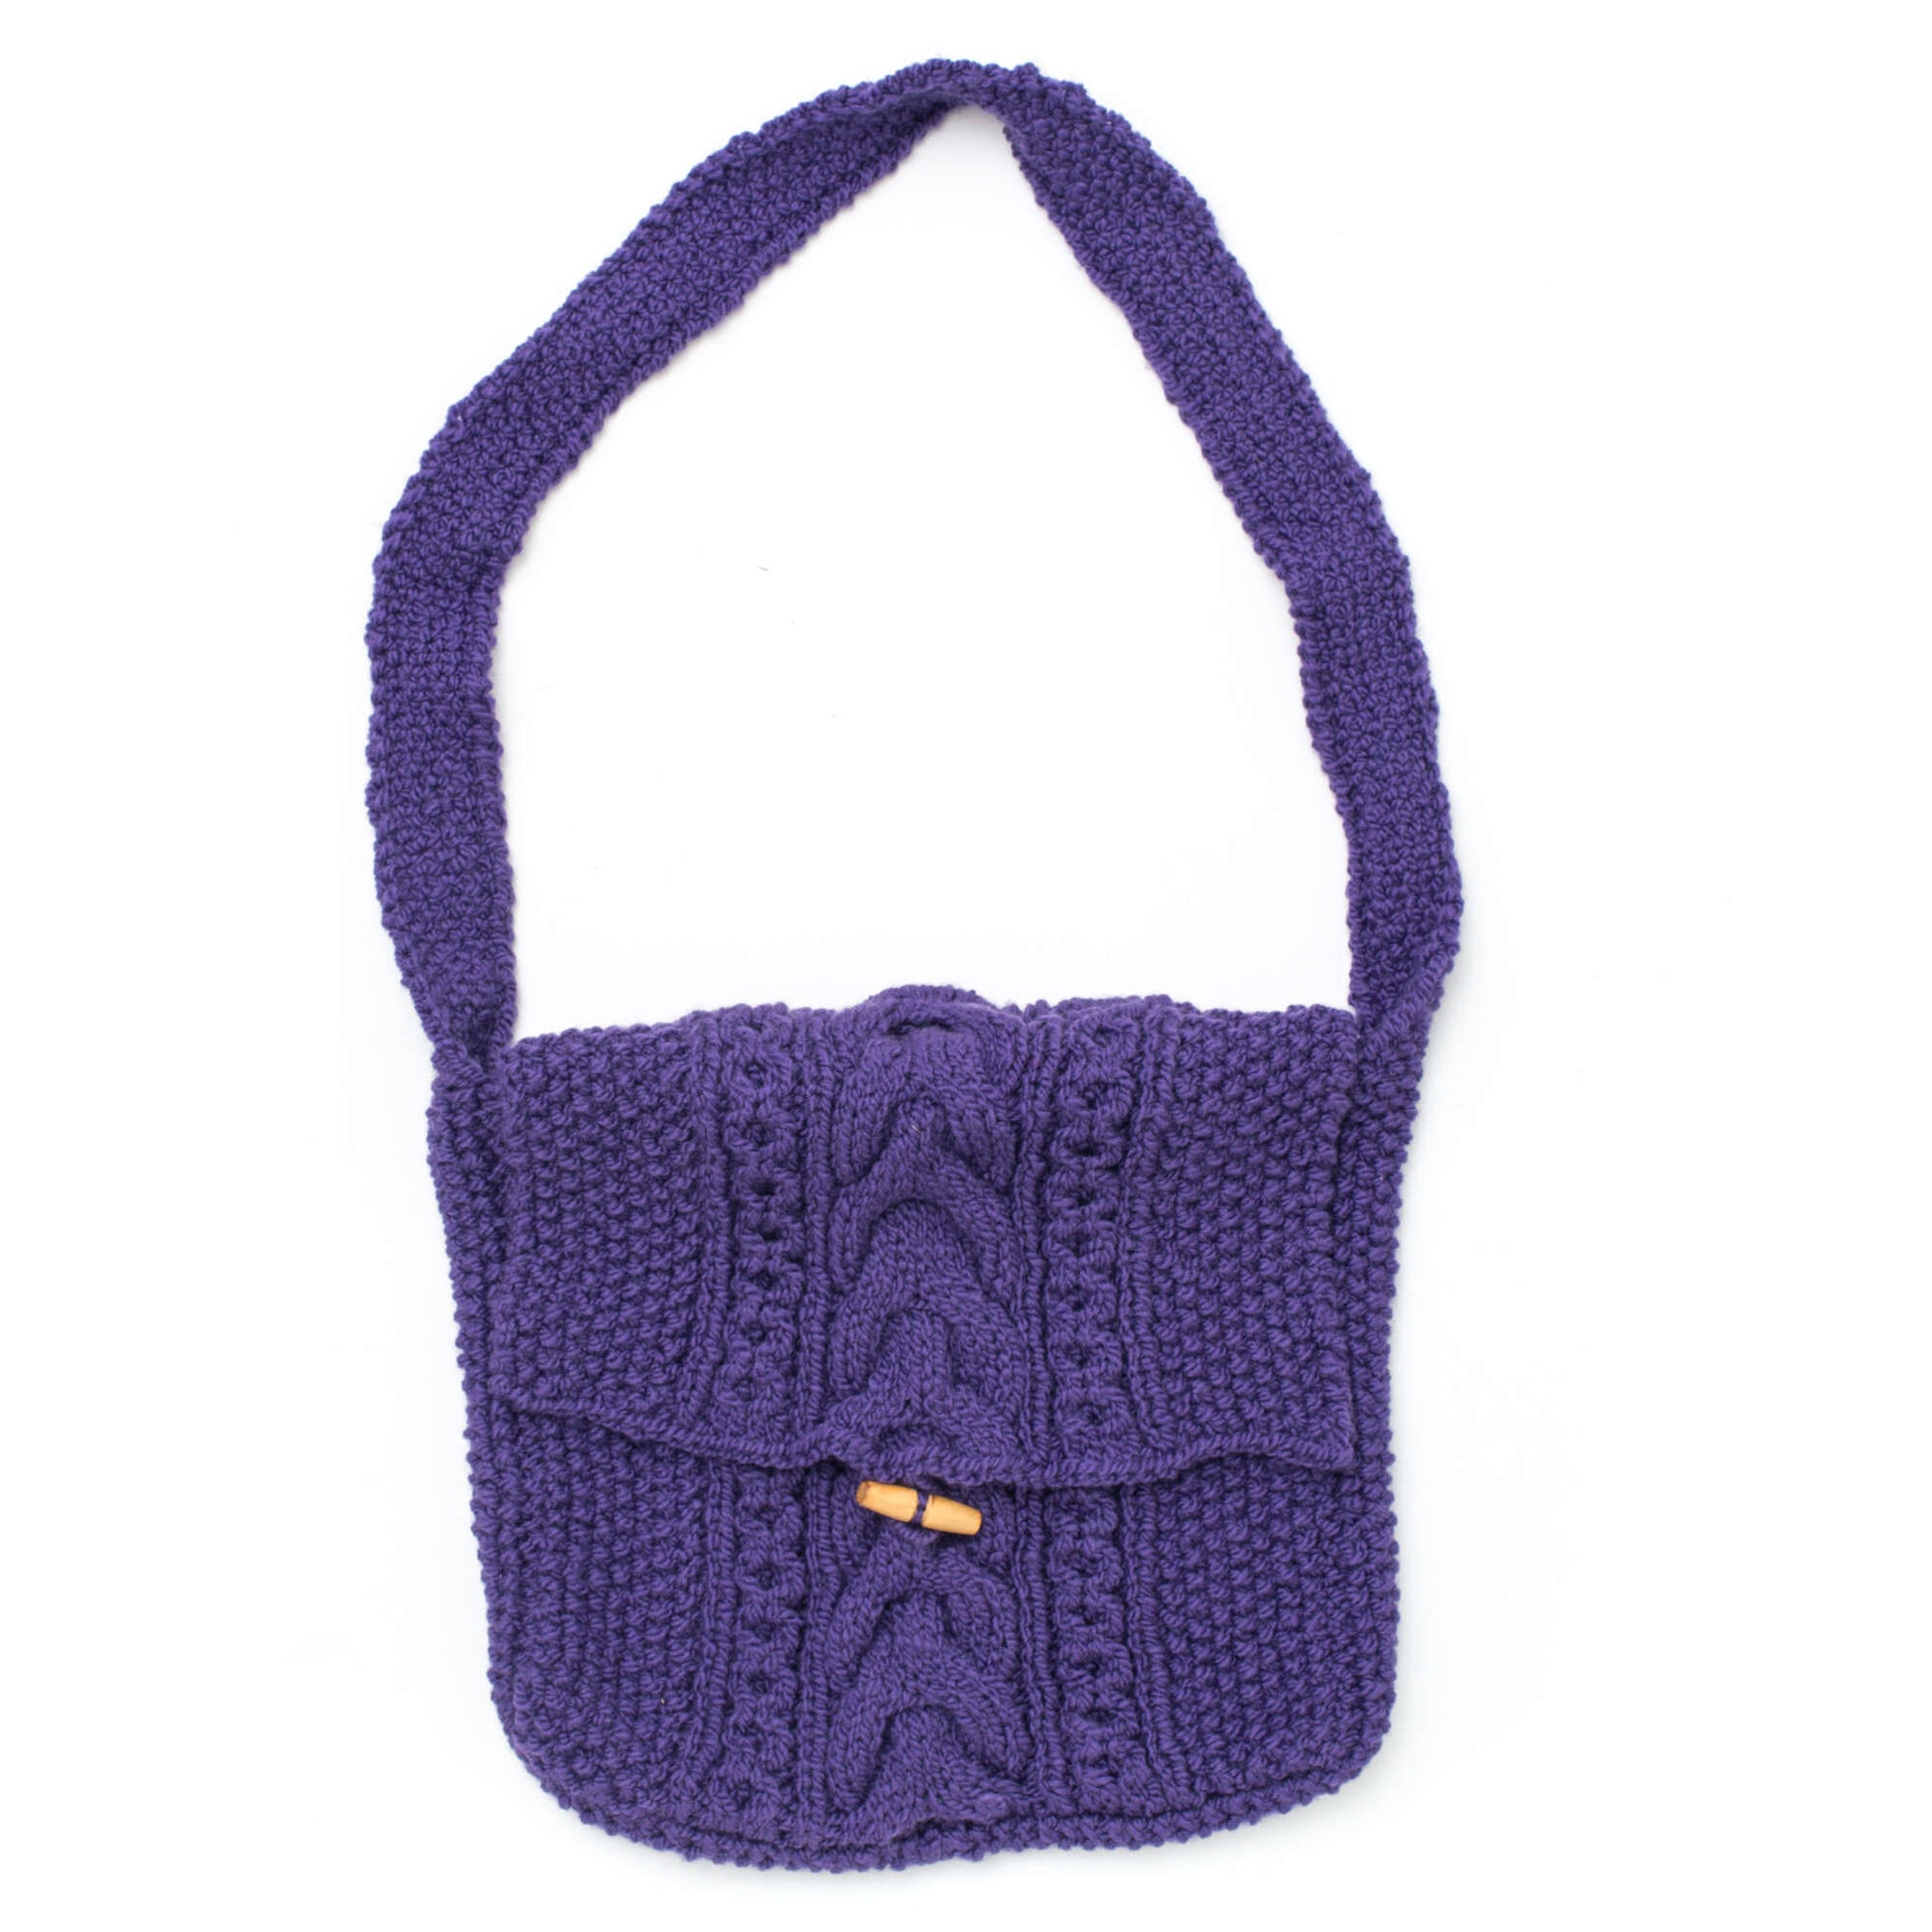 Free Patons Seed Stitch And Cables Bag Knit Pattern